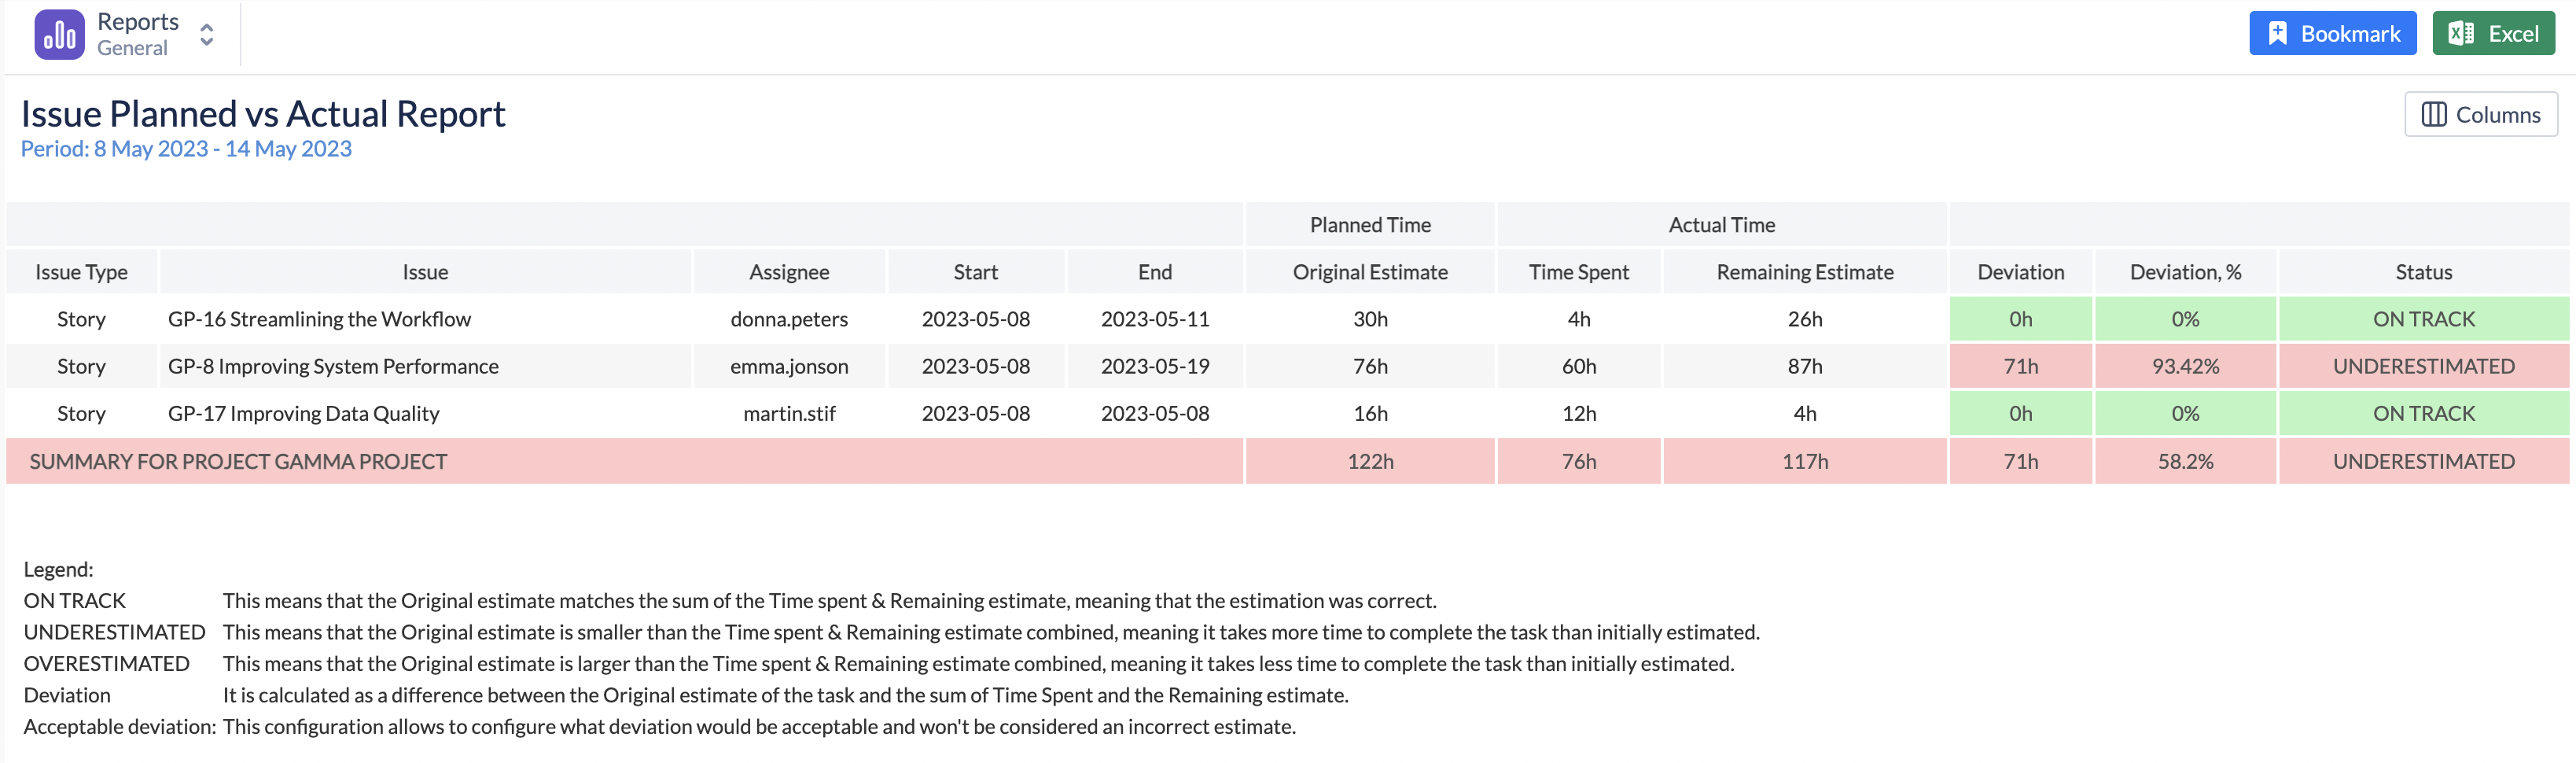 Jira Issue Planned vs Actual Report in ActivityTimeline